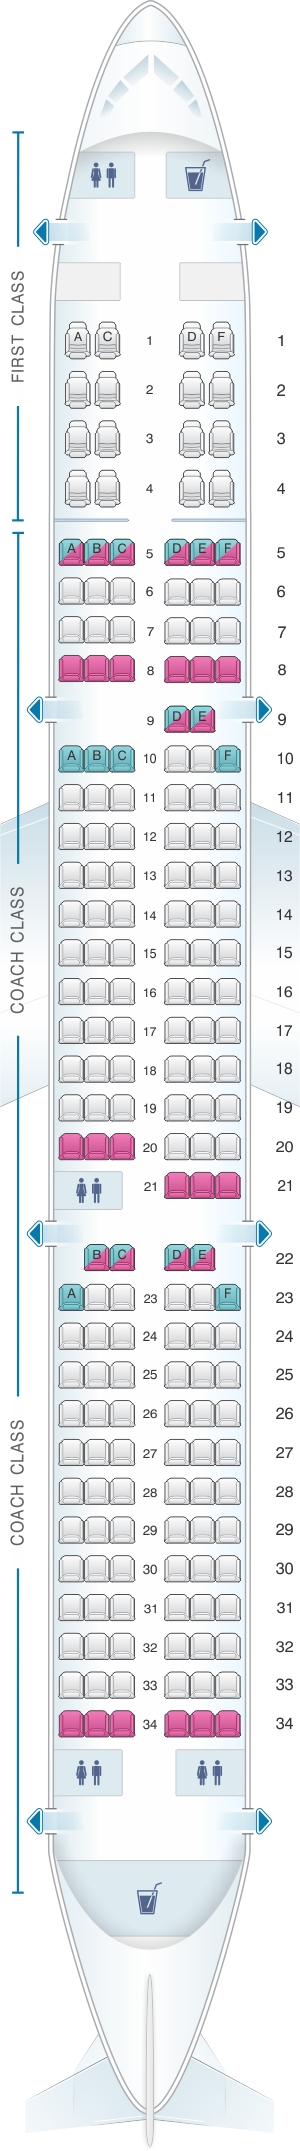 Seating Chart For Airbus A321